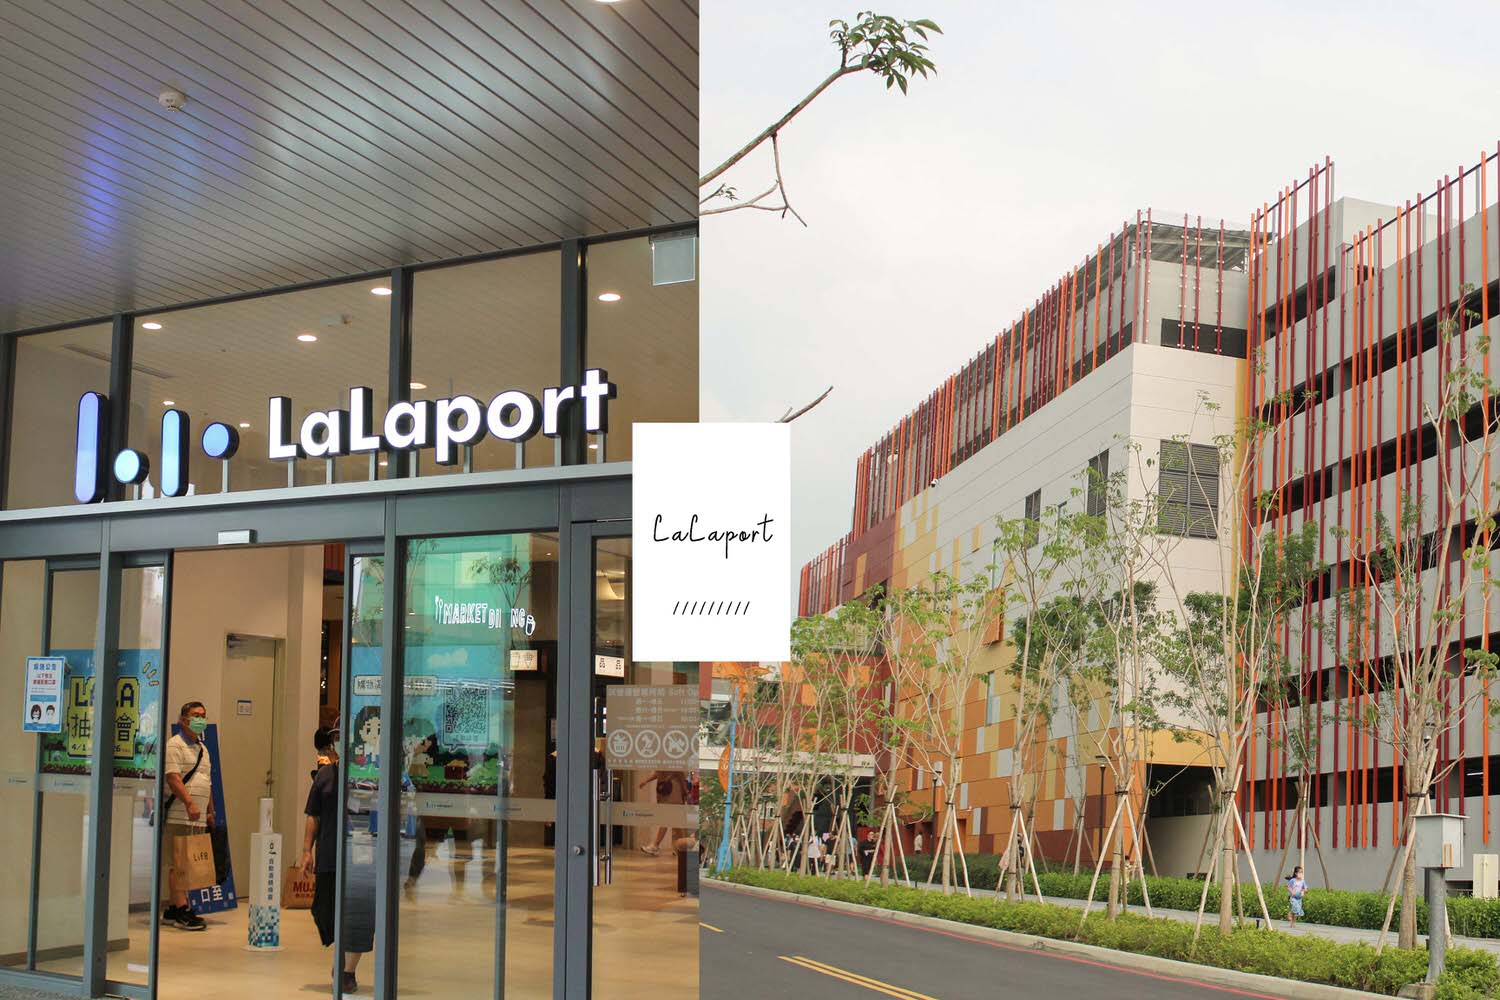 lalaport